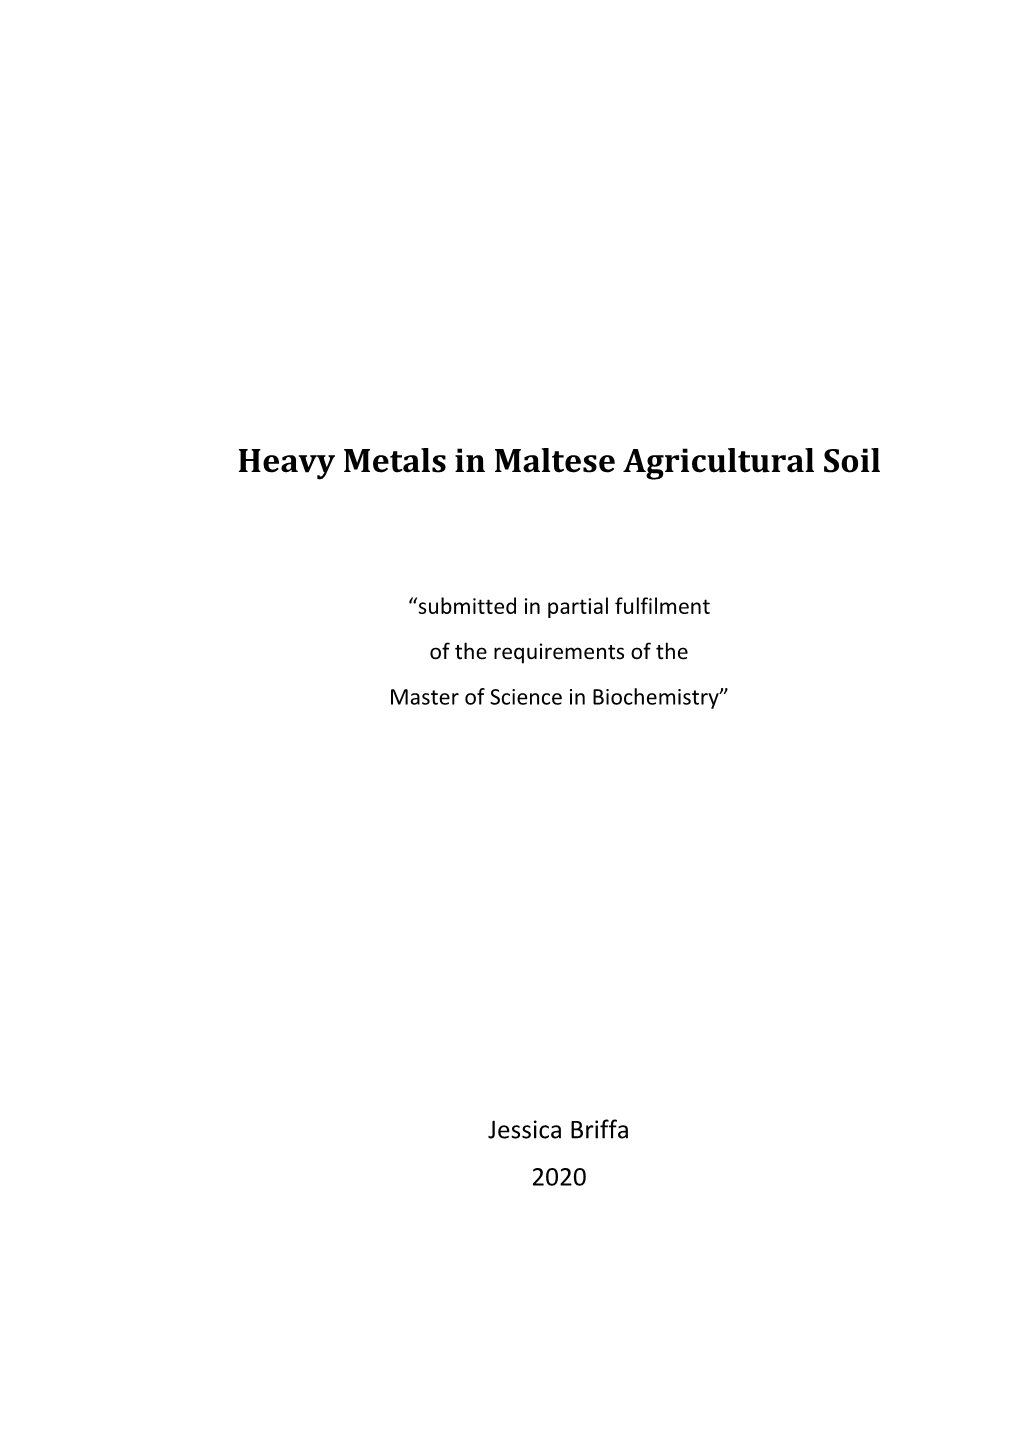 Heavy Metals in Maltese Agricultural Soil